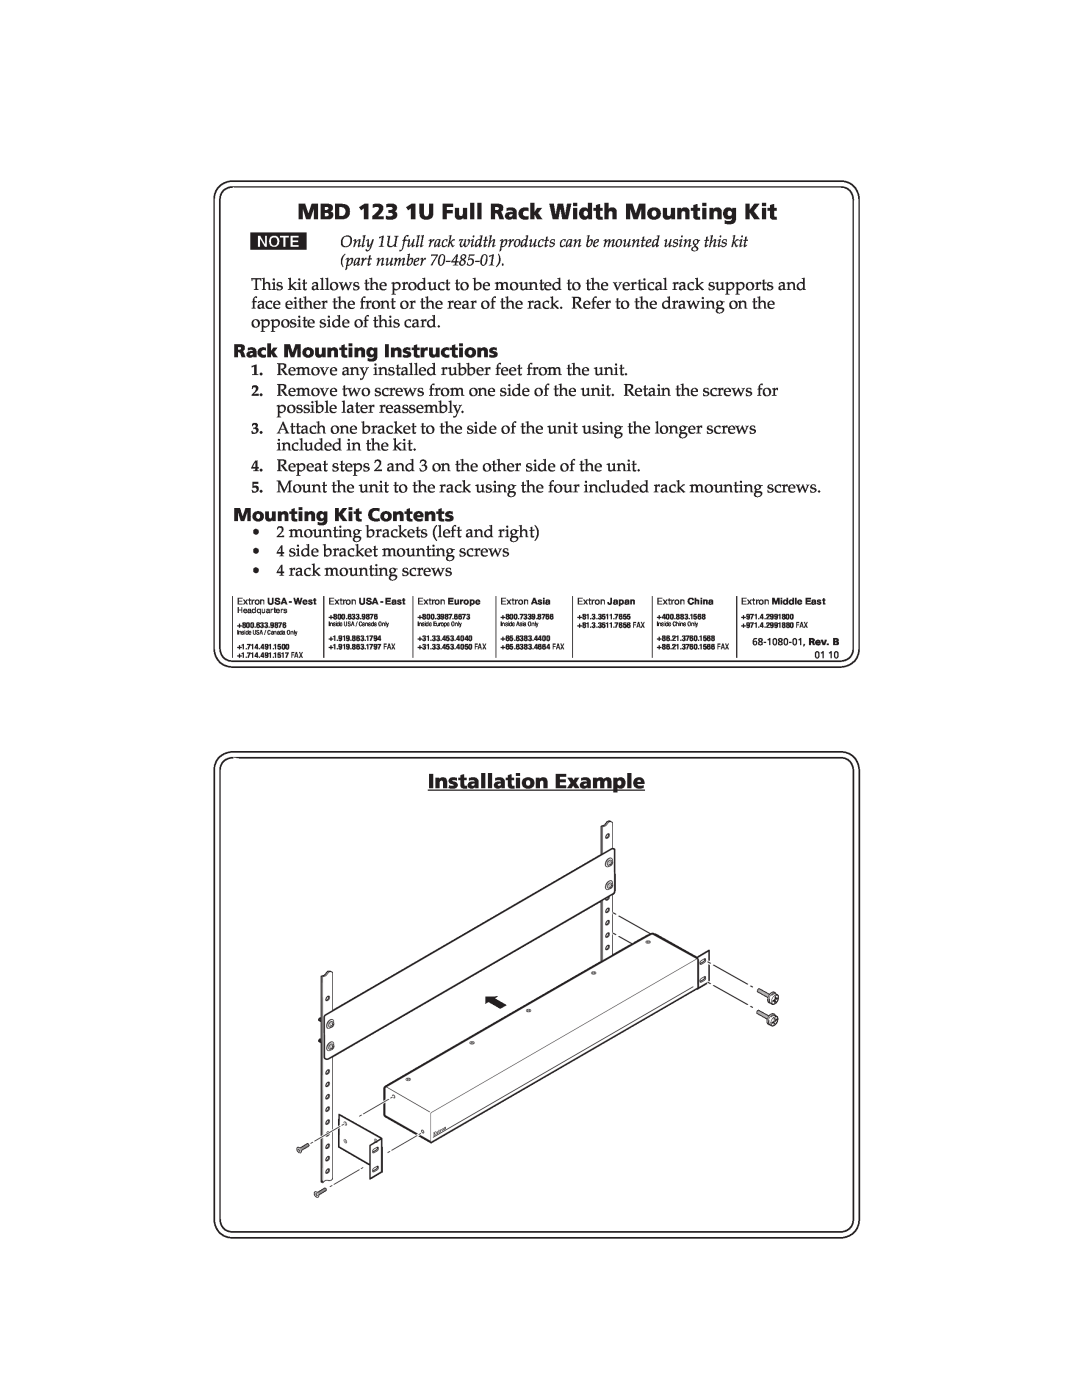 Extron electronic manual MBD 123 1U Full Rack Width Mounting Kit, Installation Example, Rack Mounting Instructions 